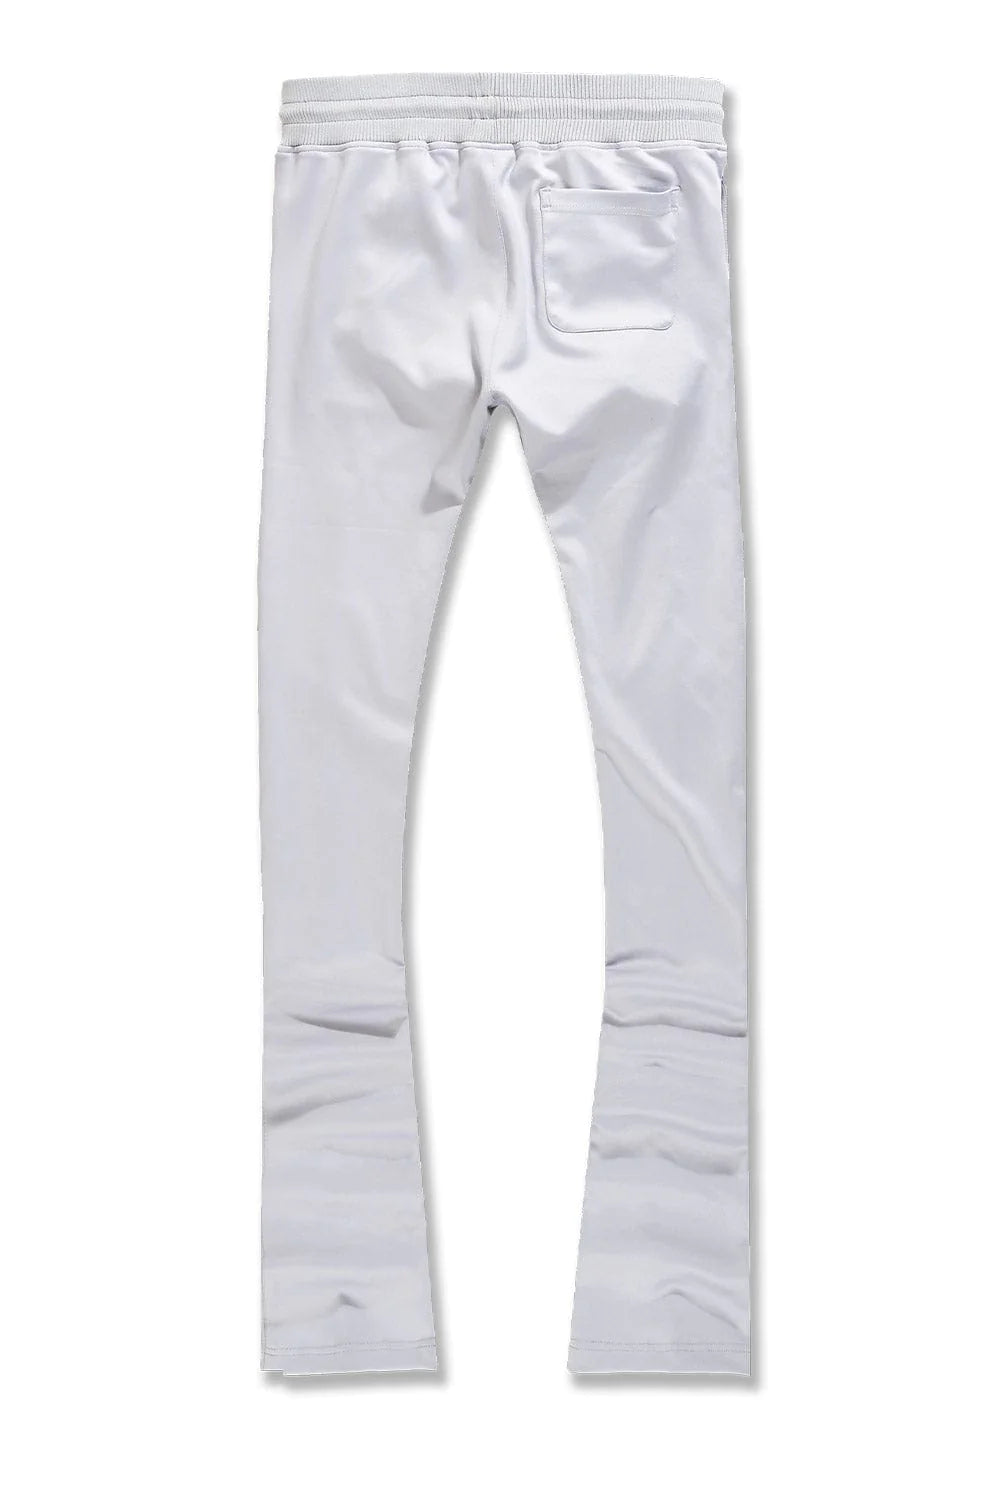 CALABRIA STACKED TRACK PANTS (CEMENT)